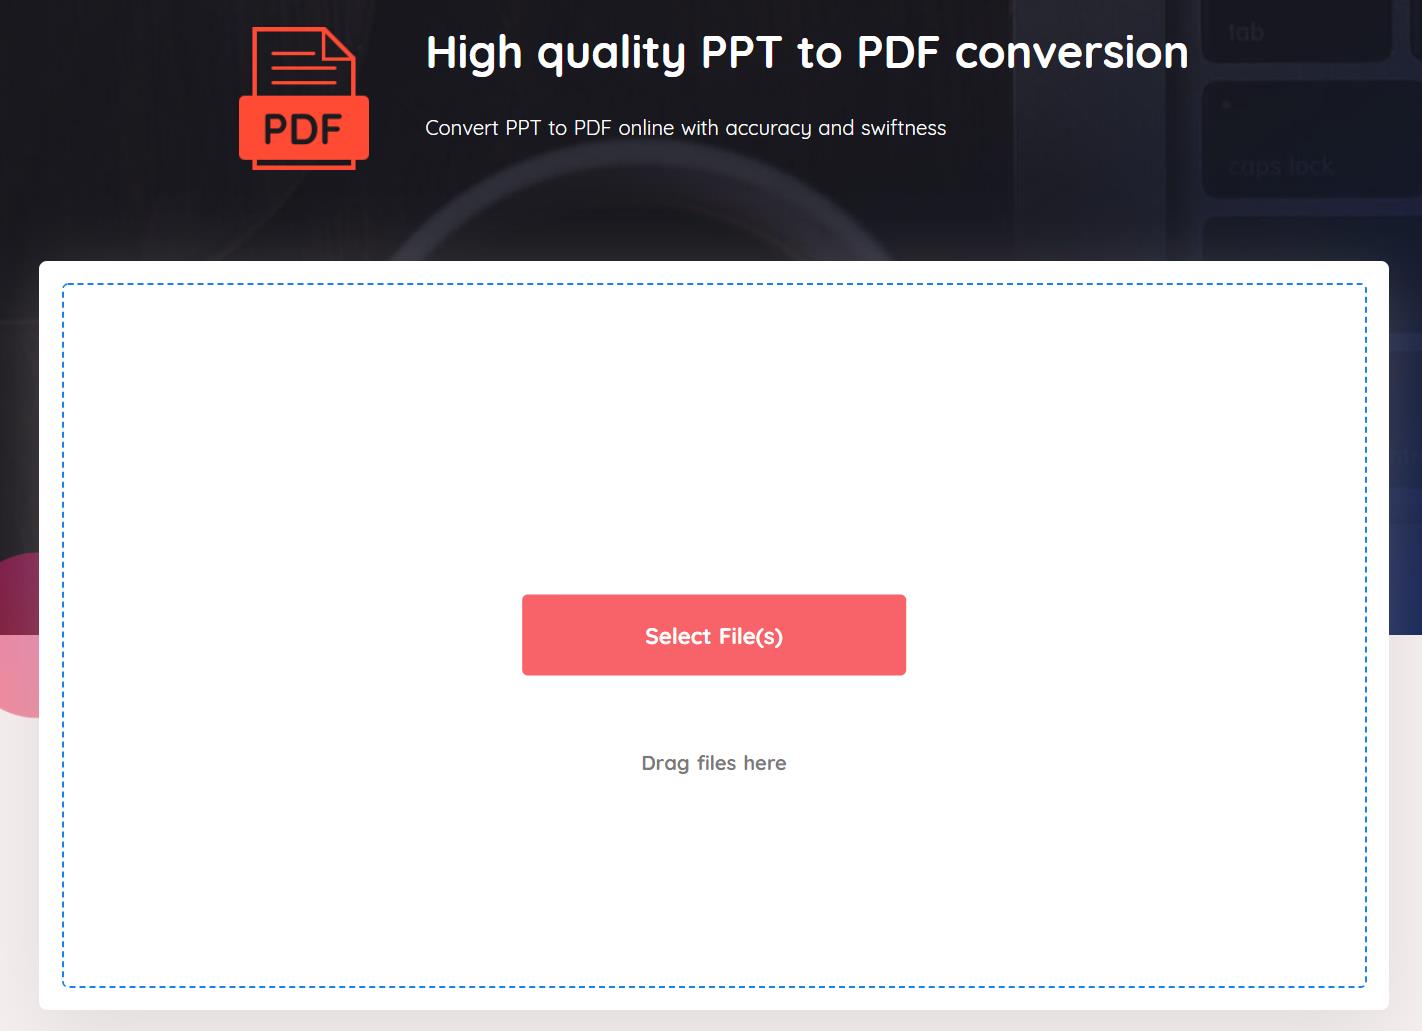 How to save ppt as pdf in fabpdf step1